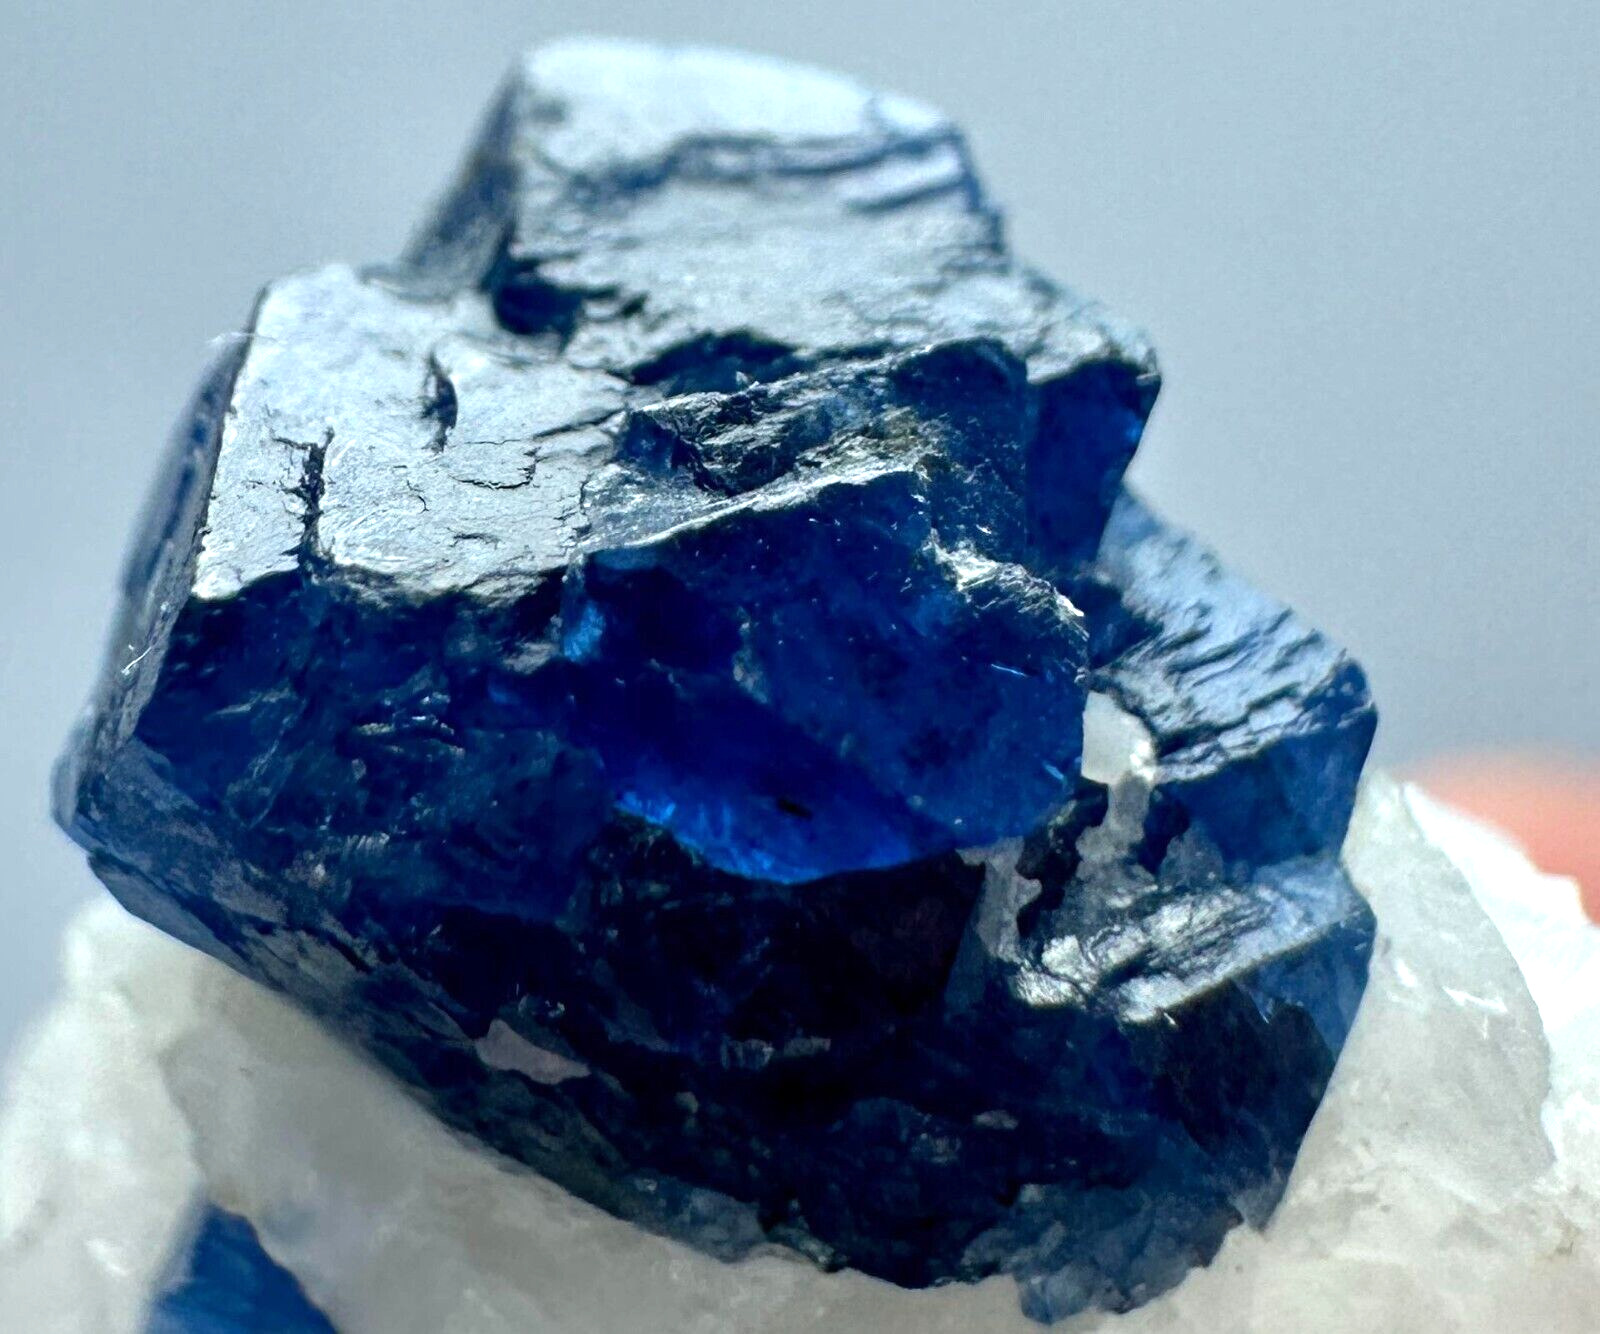 125 Carat Extremely Rare Top Blue Spinel Crystals, Mica On Matrx From Skardu @PK